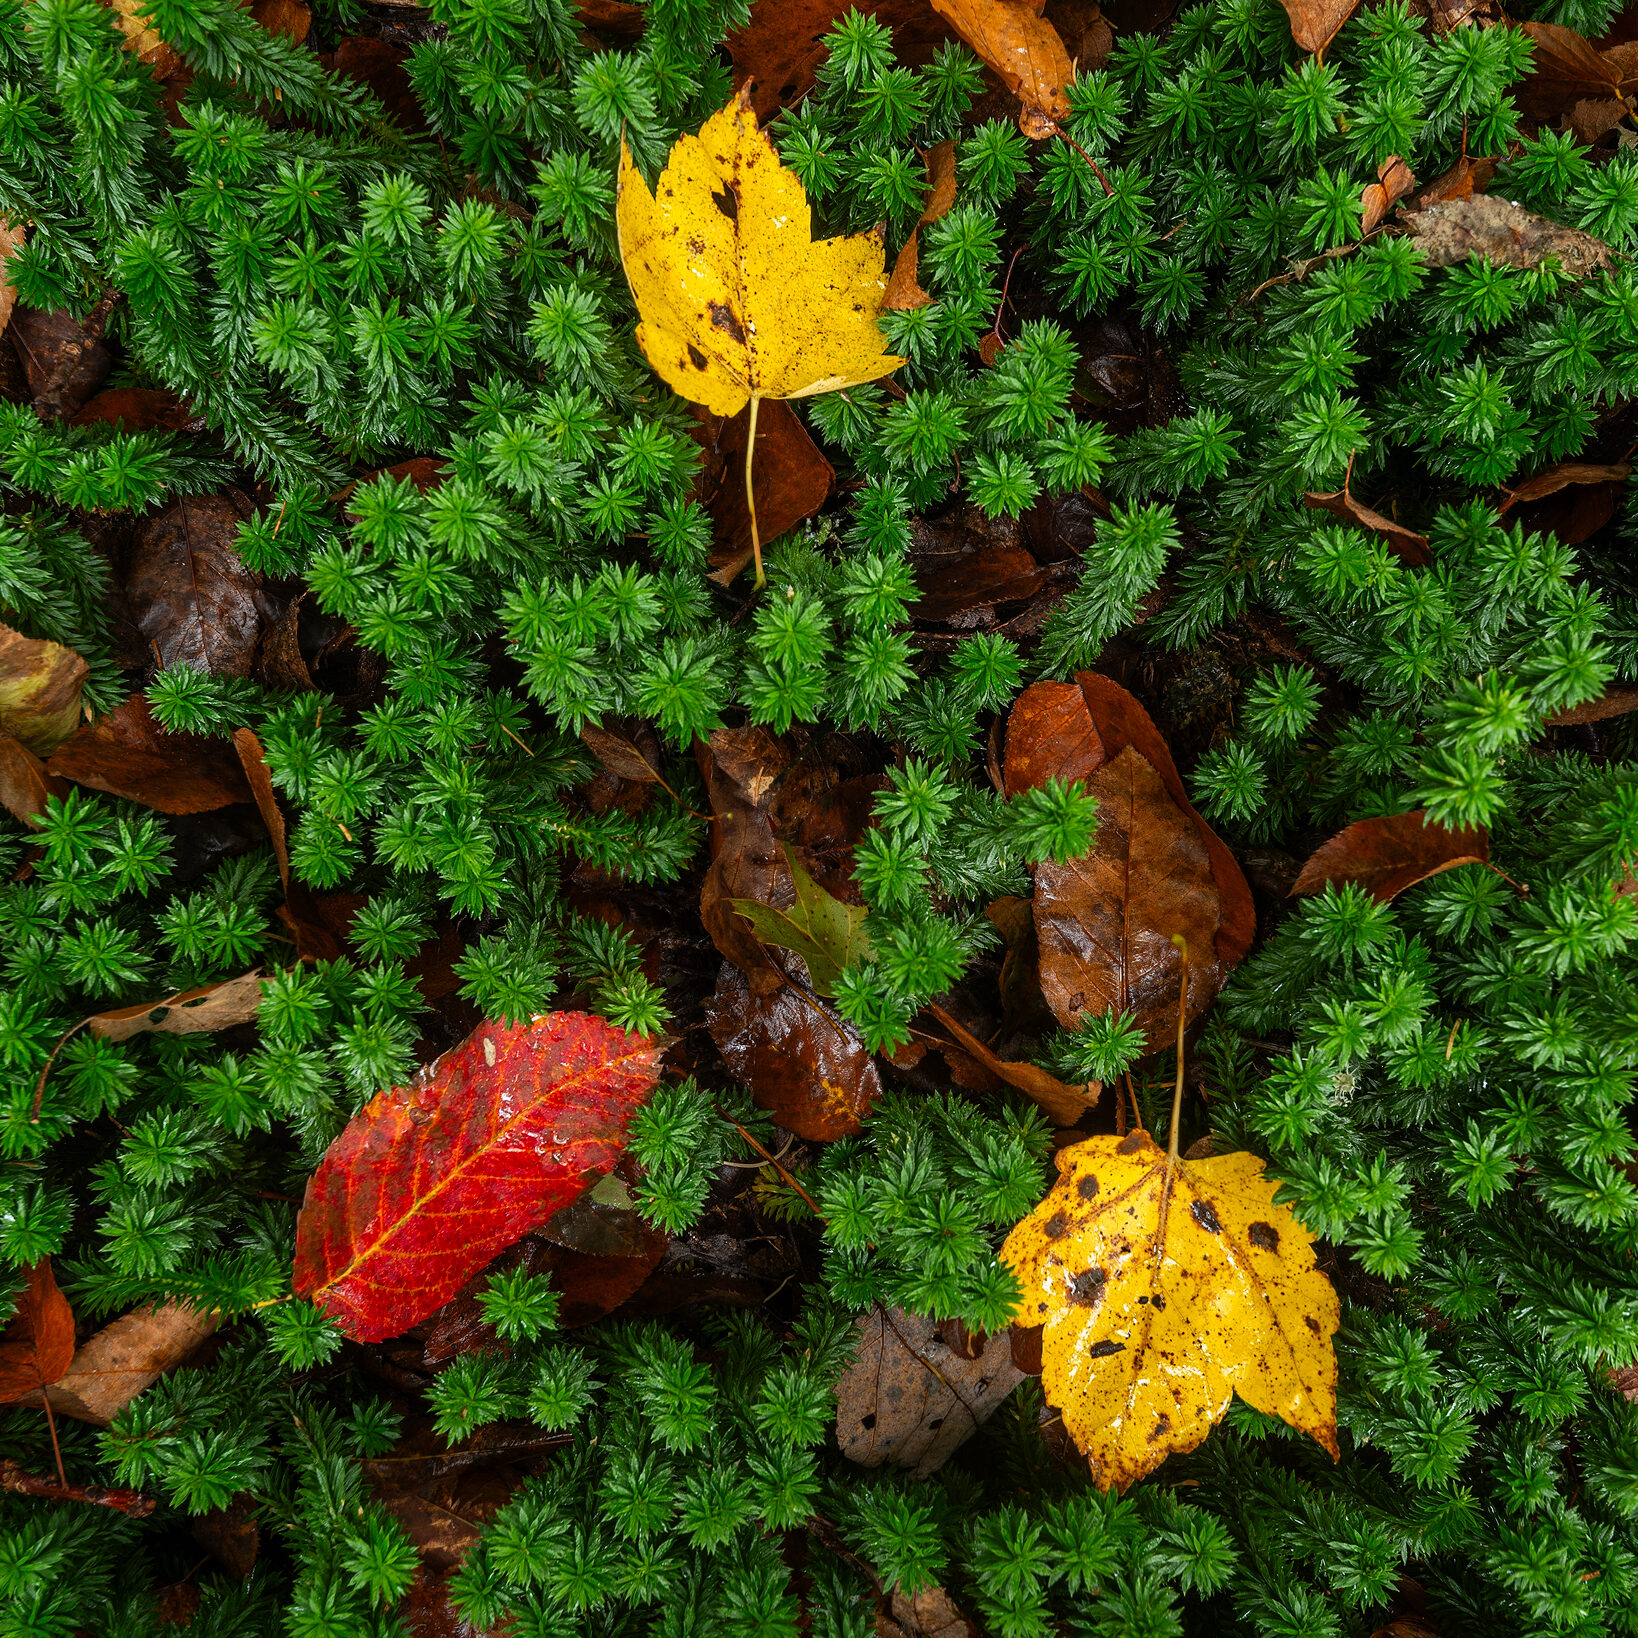 Autumn leaves lay to rest along the forest floor blanketed with a bed of mosses thriving in the wet air of the Southern Appalachian Mountains